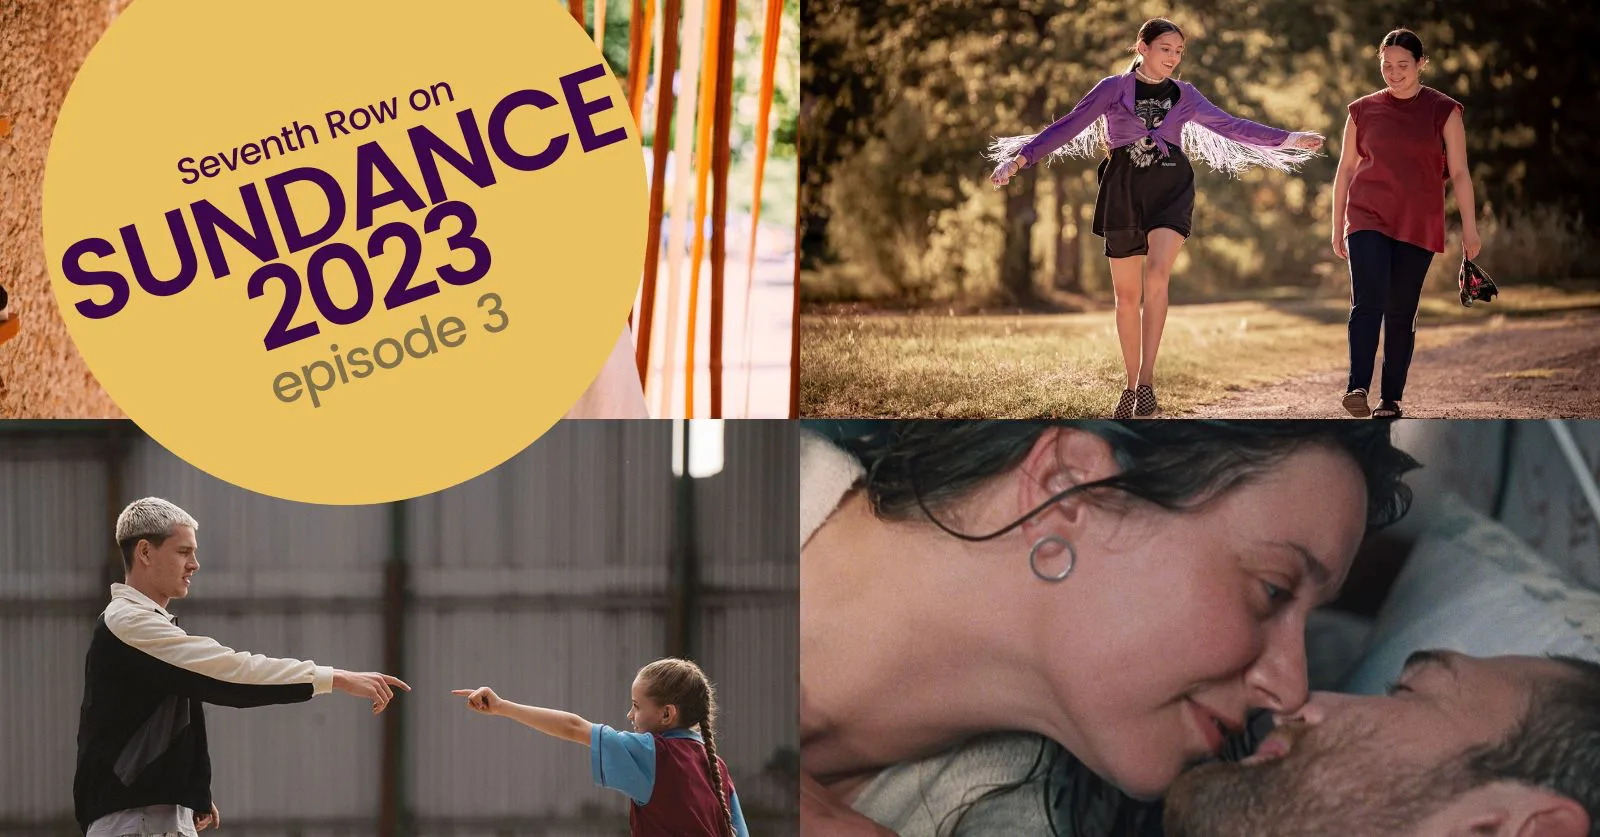 Sundance films When It Melts, Fancy Dance, Scrapper, and Slow: Clockwise from top left. Top right: a young Indigenous girls spreads her arms as if to dance, walking alongside her aunt (Lily Gladstone) in the Sundance film Fancy Dance. Bottom left: Harris Dickinson (left) stars as a young dad opposite his 12-year-old daughter (right) in the Sundance film Scrapper. The pair have their arms outstretched their fingers pointing at each other. Bottom right: in a tight clasp, a man and woman almost kiss in the Sundance World Dramatic Competition film Slow.